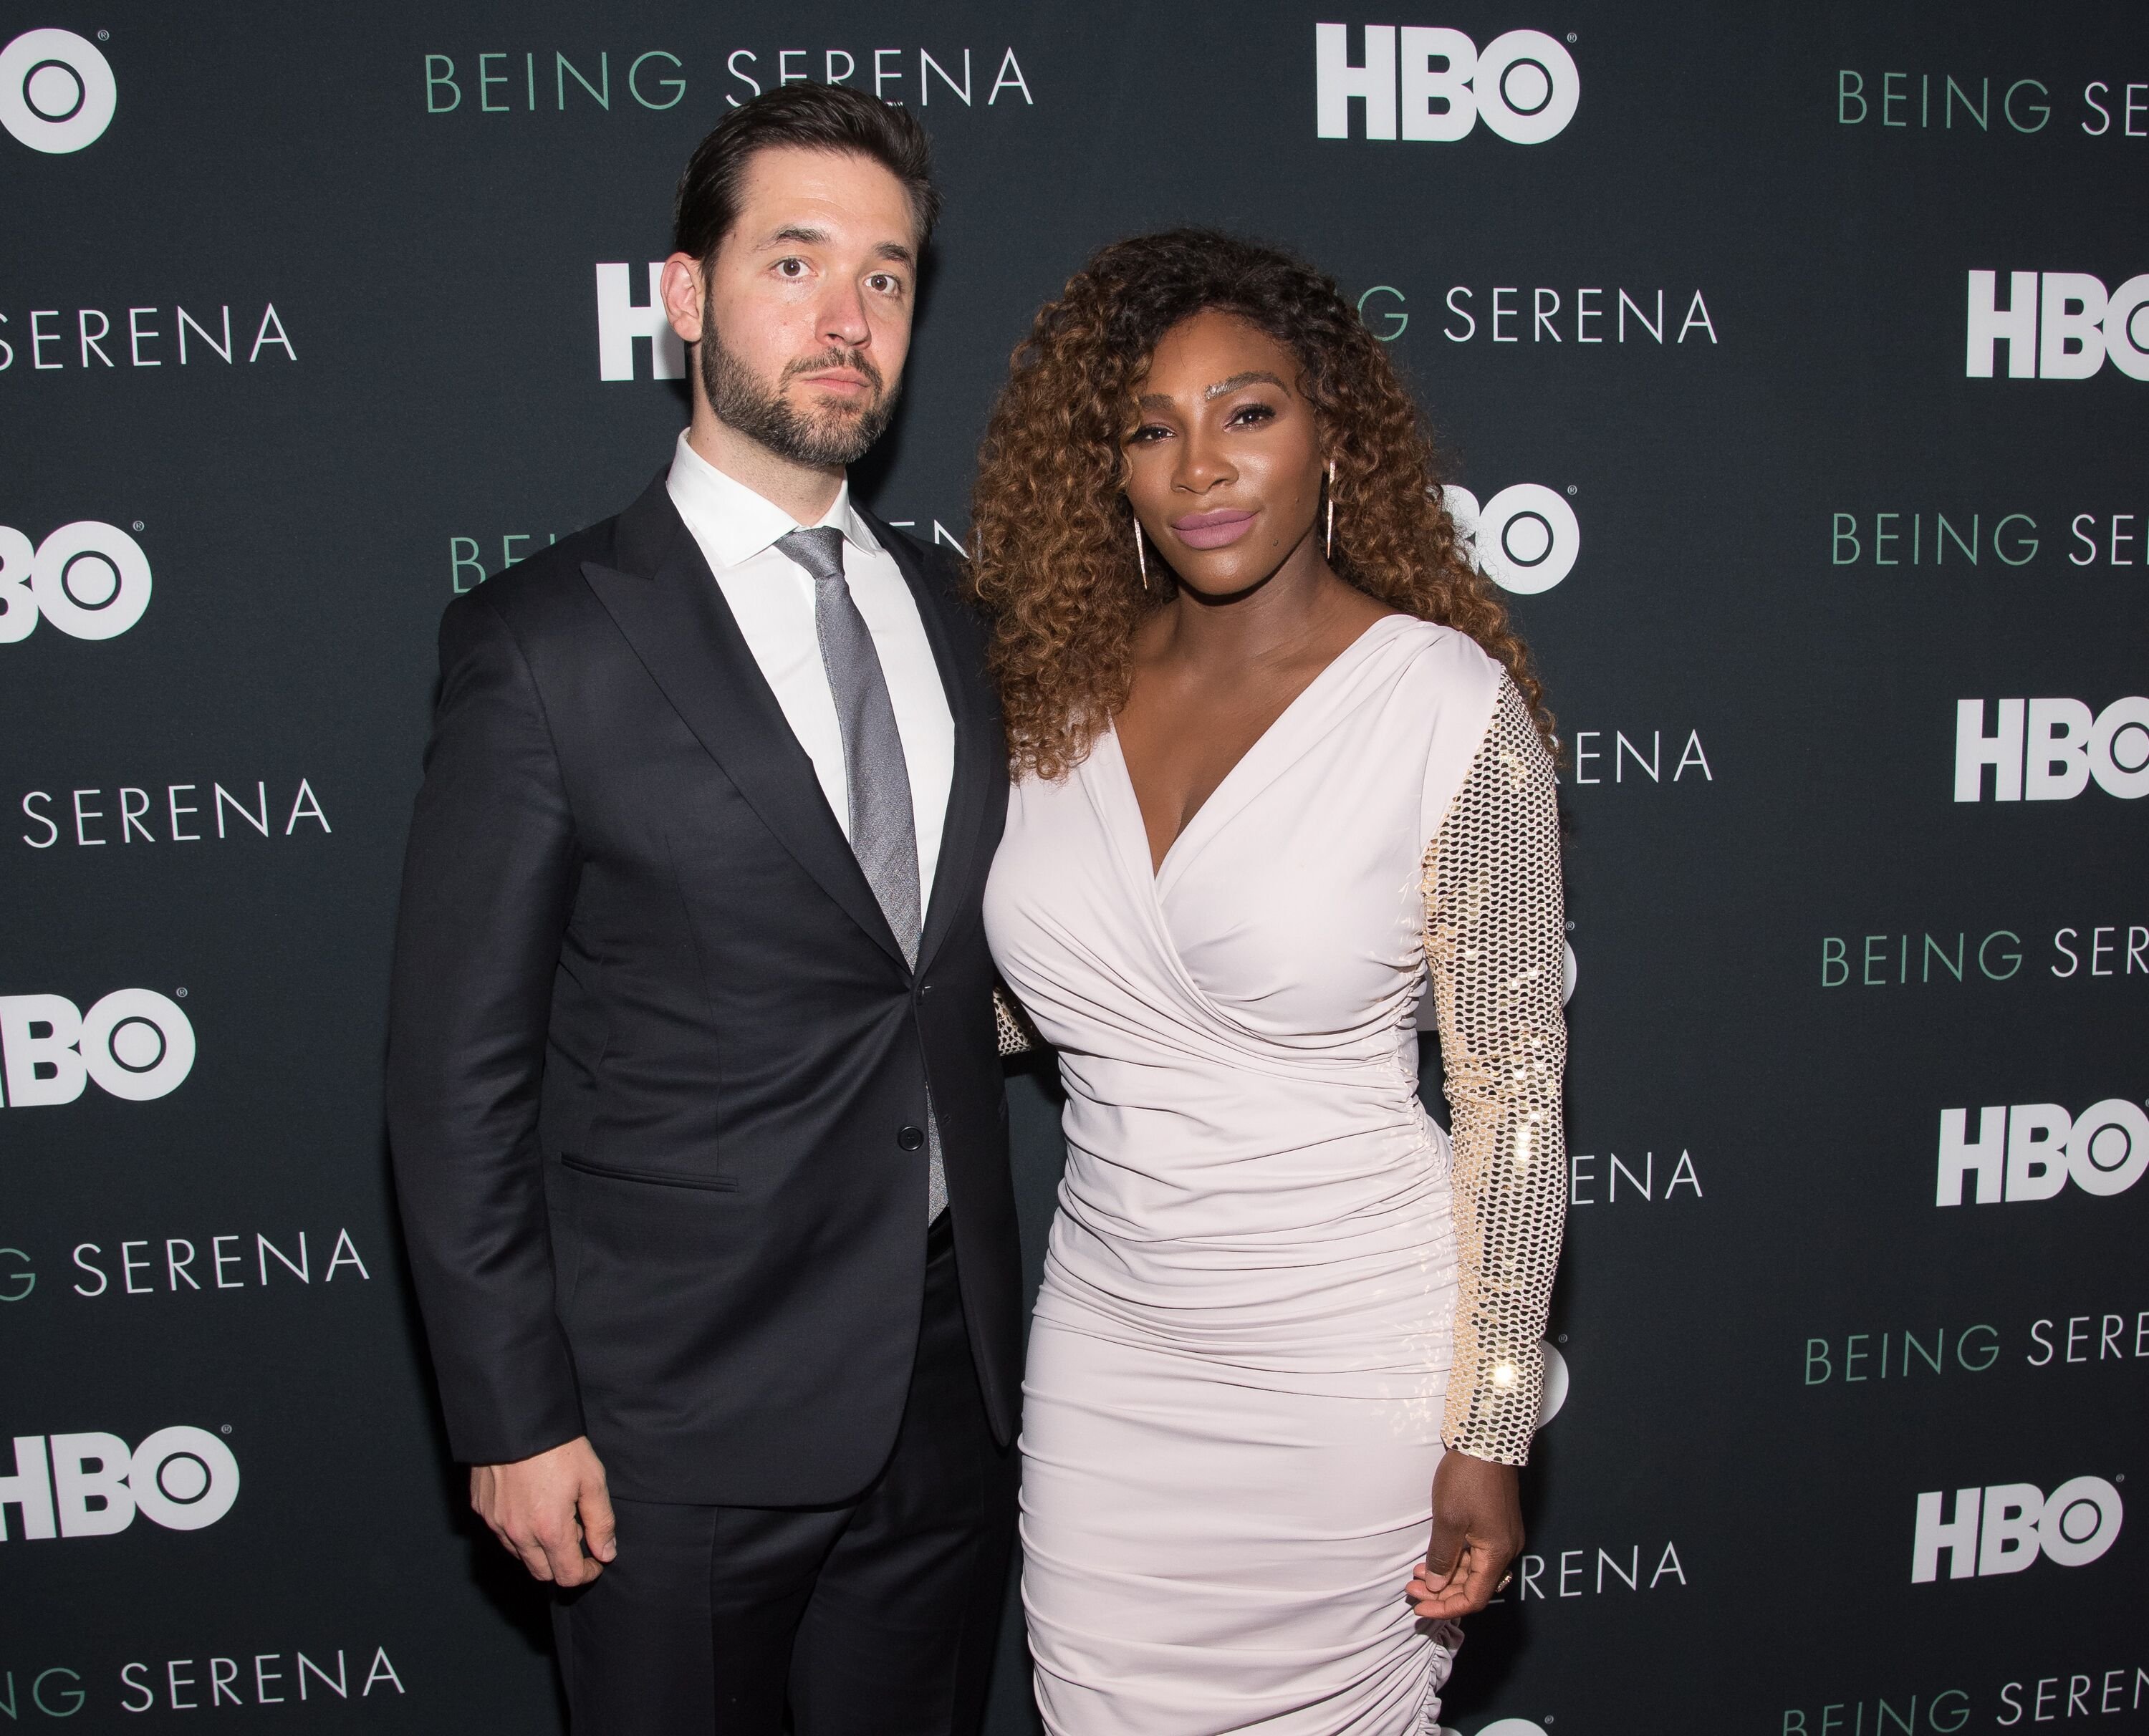 Serena Williams and husband Alexis Ohanian attend the "Being Serena" New York premiere in April 2018. | Source: Getty Images